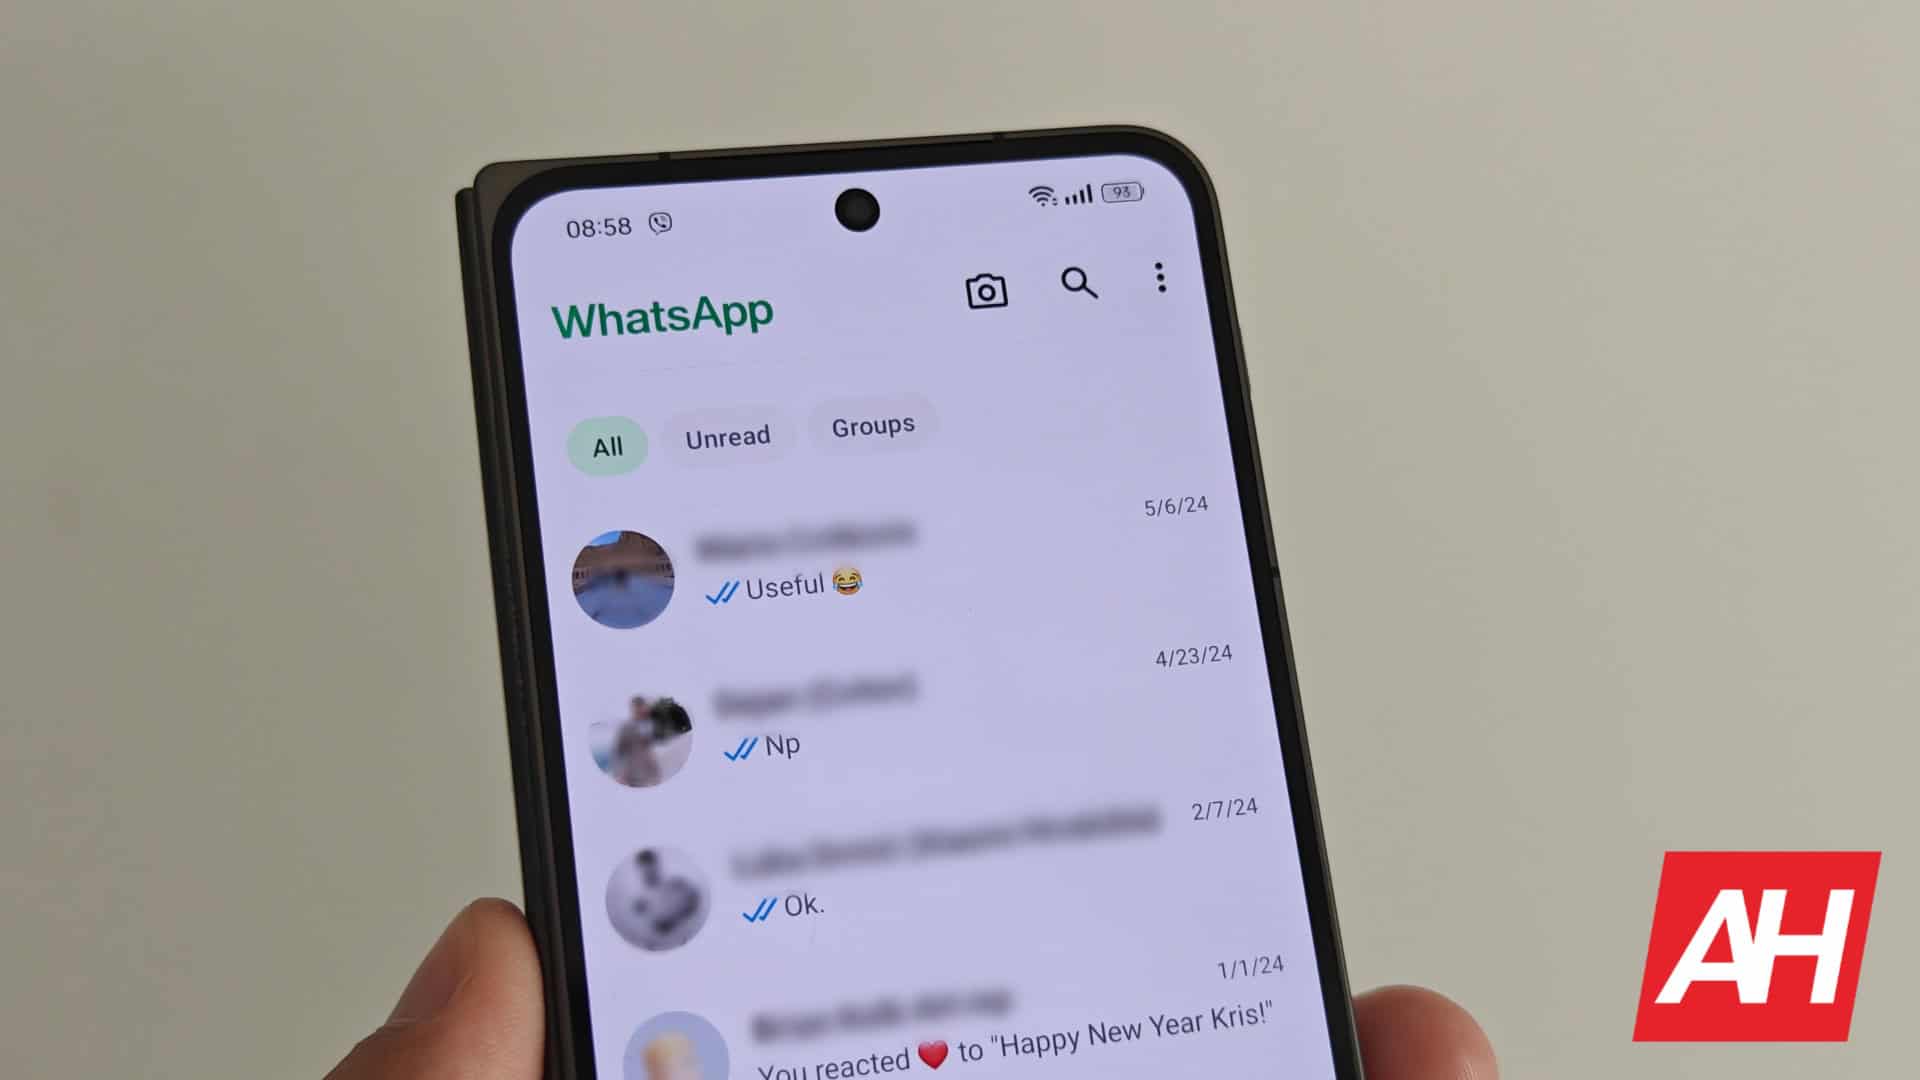 WhatsApp users are required to verify their date of birth in some states